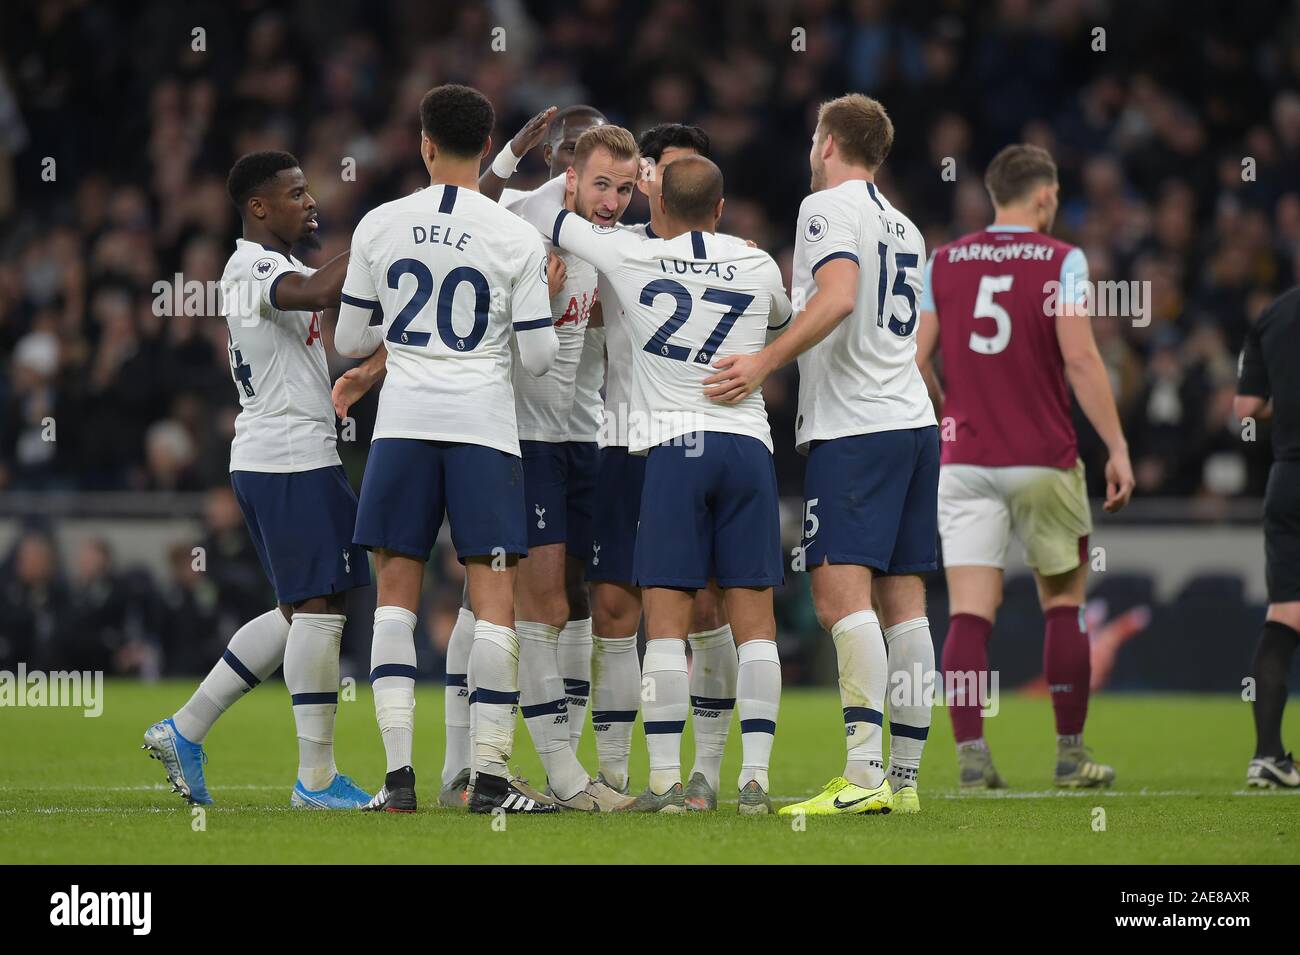 London, UK. 7th December 2019. GOAL Harry Kane of Tottenham Hotspur scores the fort goal during the Tottenham Hotspur vs Burnley Premier League Football match at the Tottenham Hotspur Stadium on 7th December 2019-EDITORIAL USE ONLY No use with unauthorised audio, video, data, fixture lists (outside the EU), club/league logos or 'live' services. Online in-match use limited to 45 images (+15 in extra time). No use to emulate moving images. No use in betting, games or single club/league/player publications/services- Credit: Martin Dalton/Alamy Live News Stock Photo